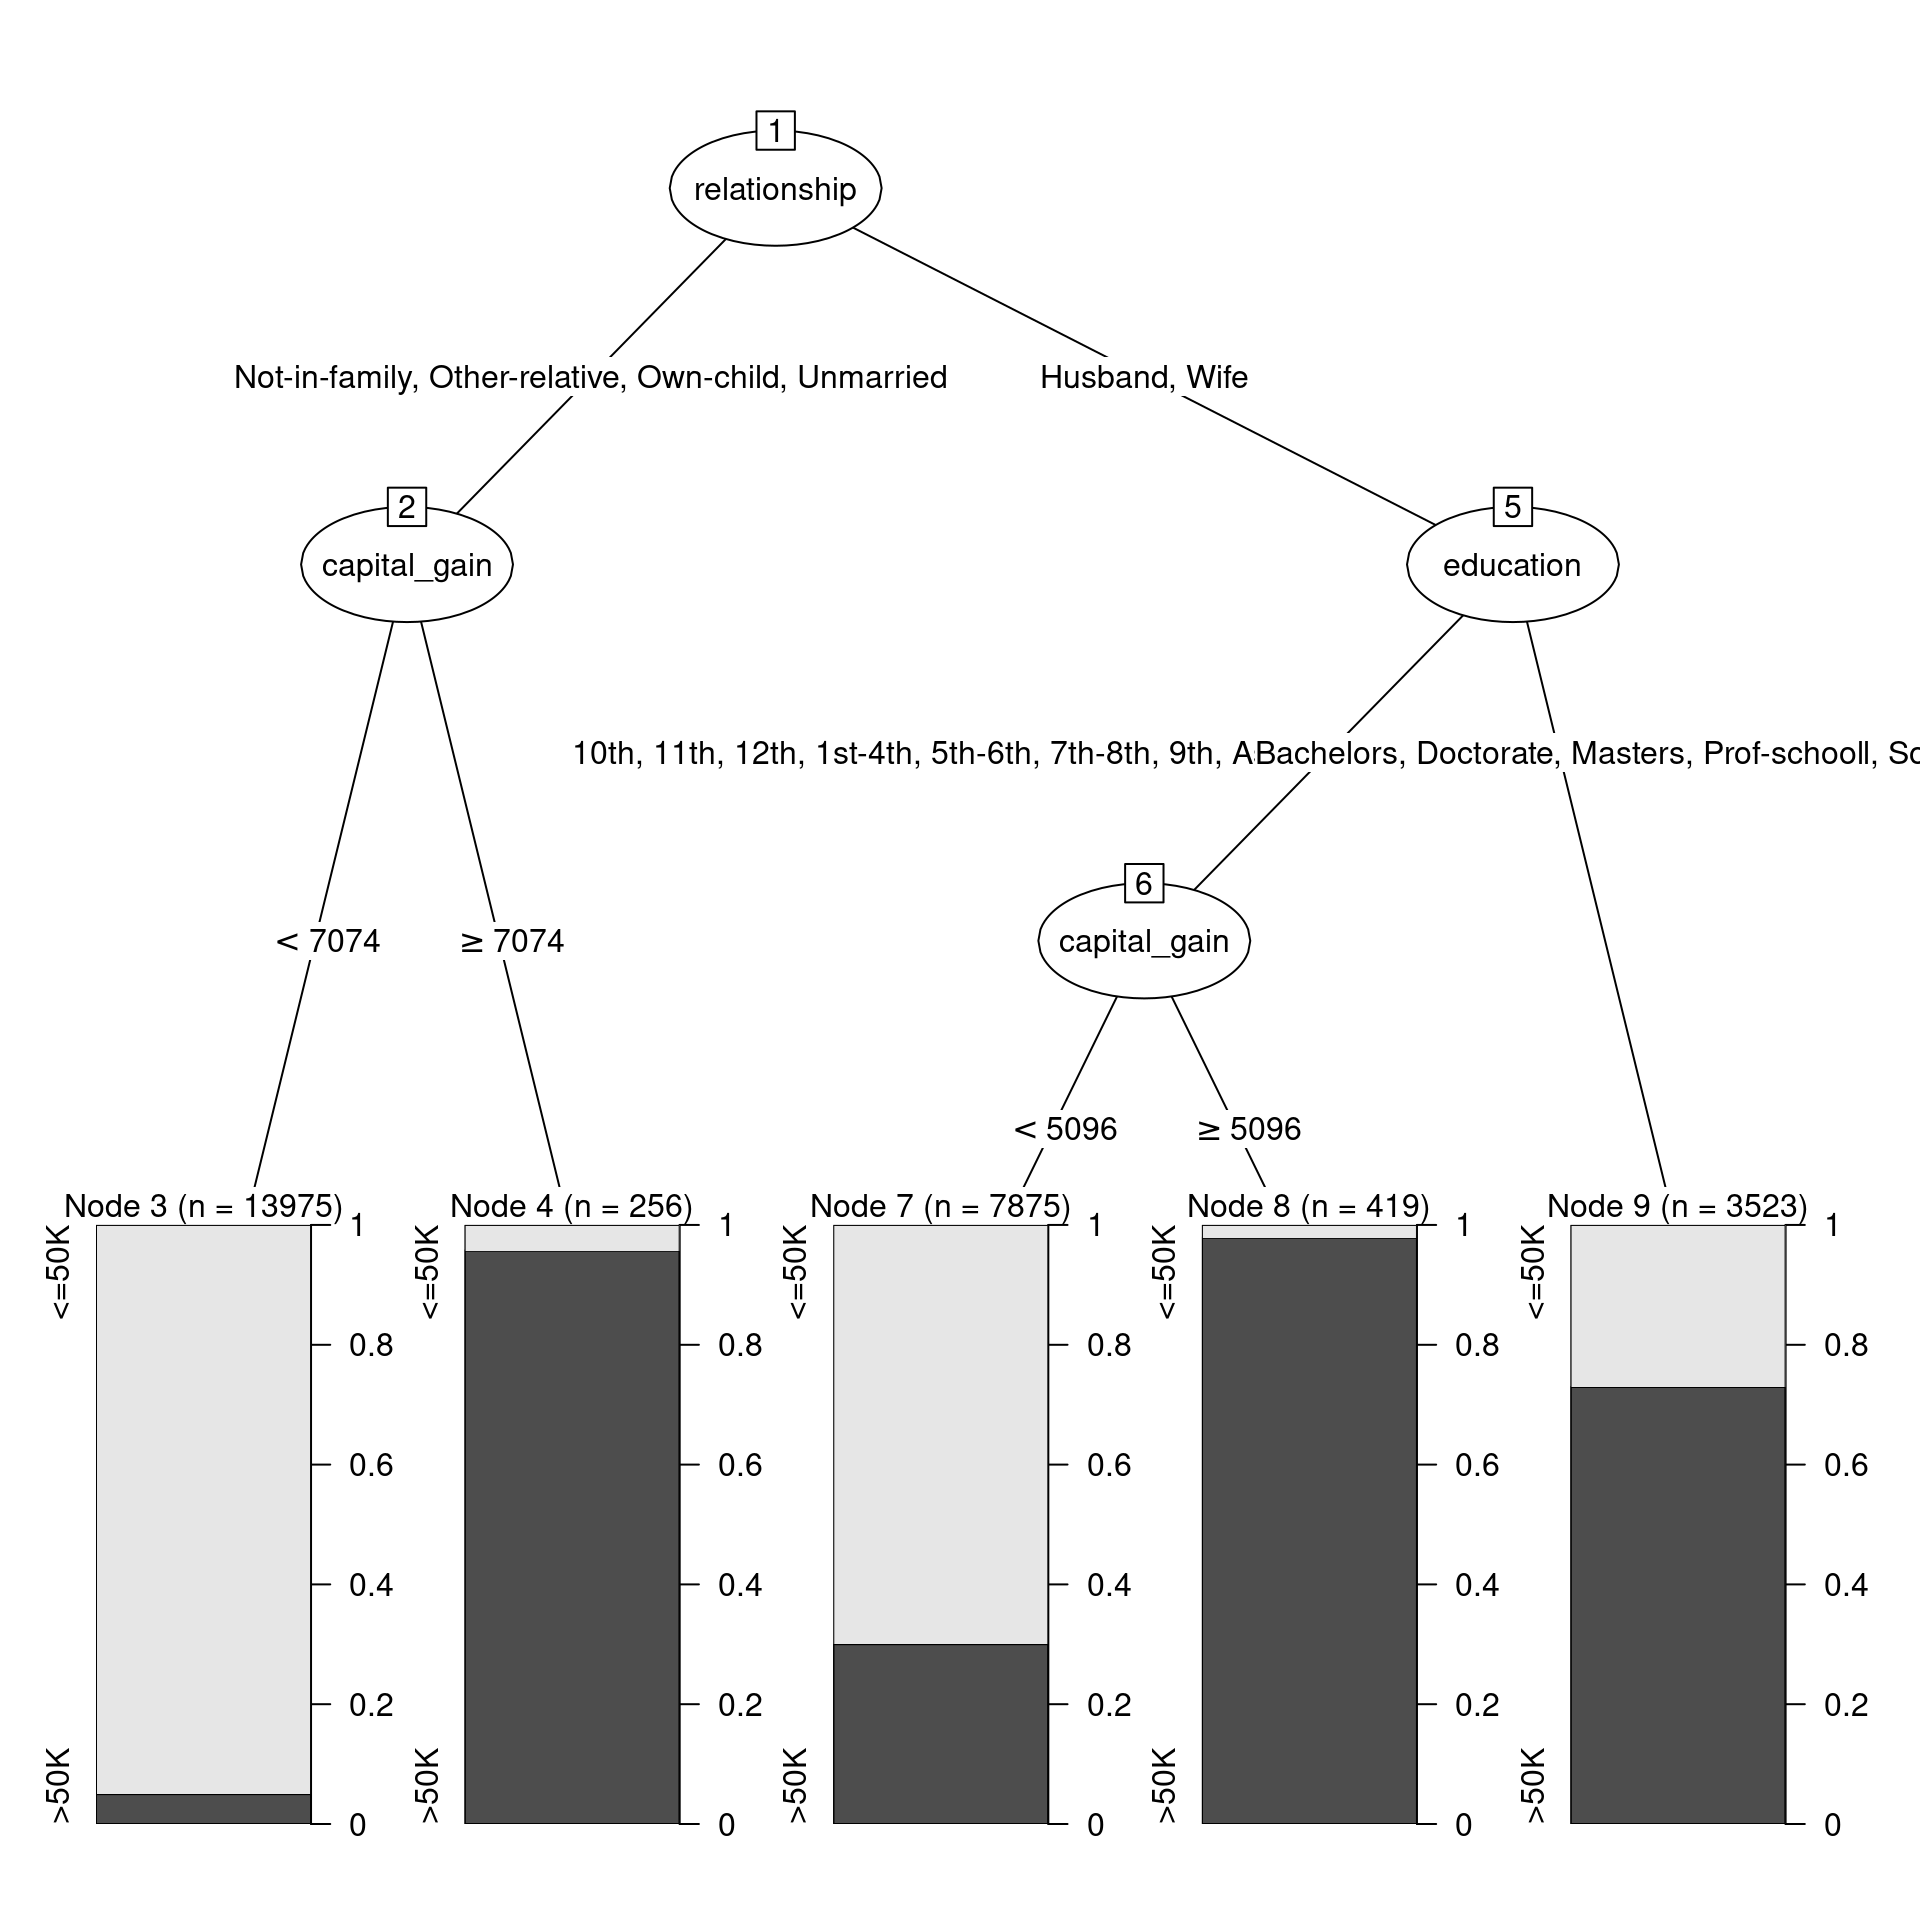 Decision tree for income using the census data.